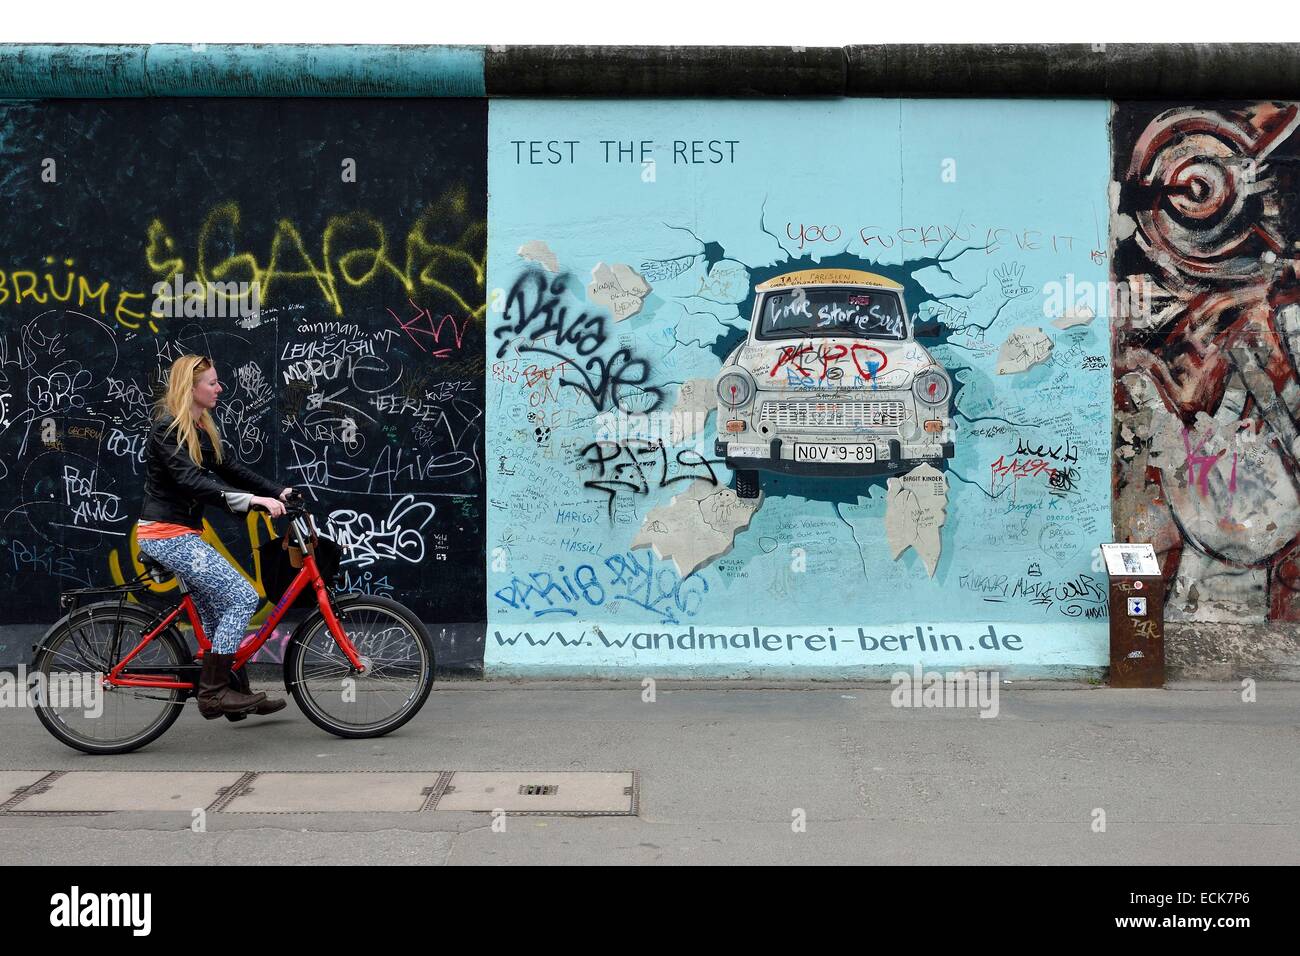 Germany, Berlin, Friedrichshain-Kreuzberg, East Side Gallery, The Wall, work by Birgit Kinder dating from the 1990's, renovated in 2009, representing a Trabant arriving in East Berlin, entitled Test the Best Stock Photo